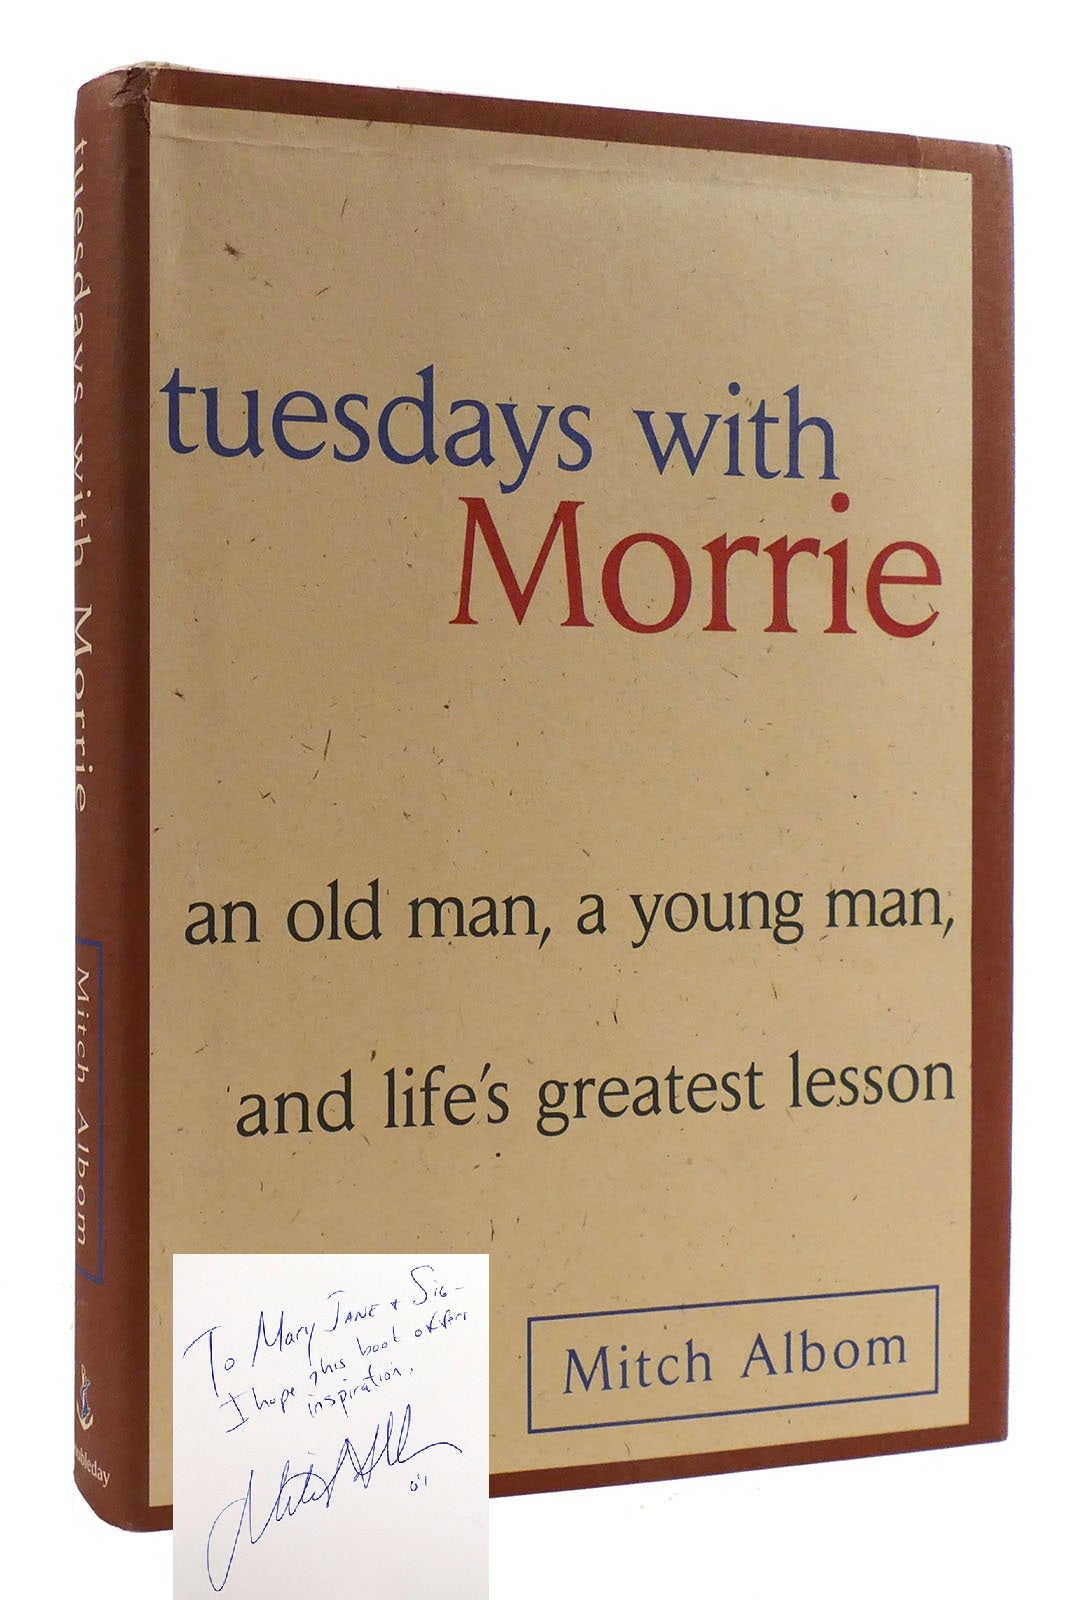 Tuesdays with Morrie » Mitch Albom